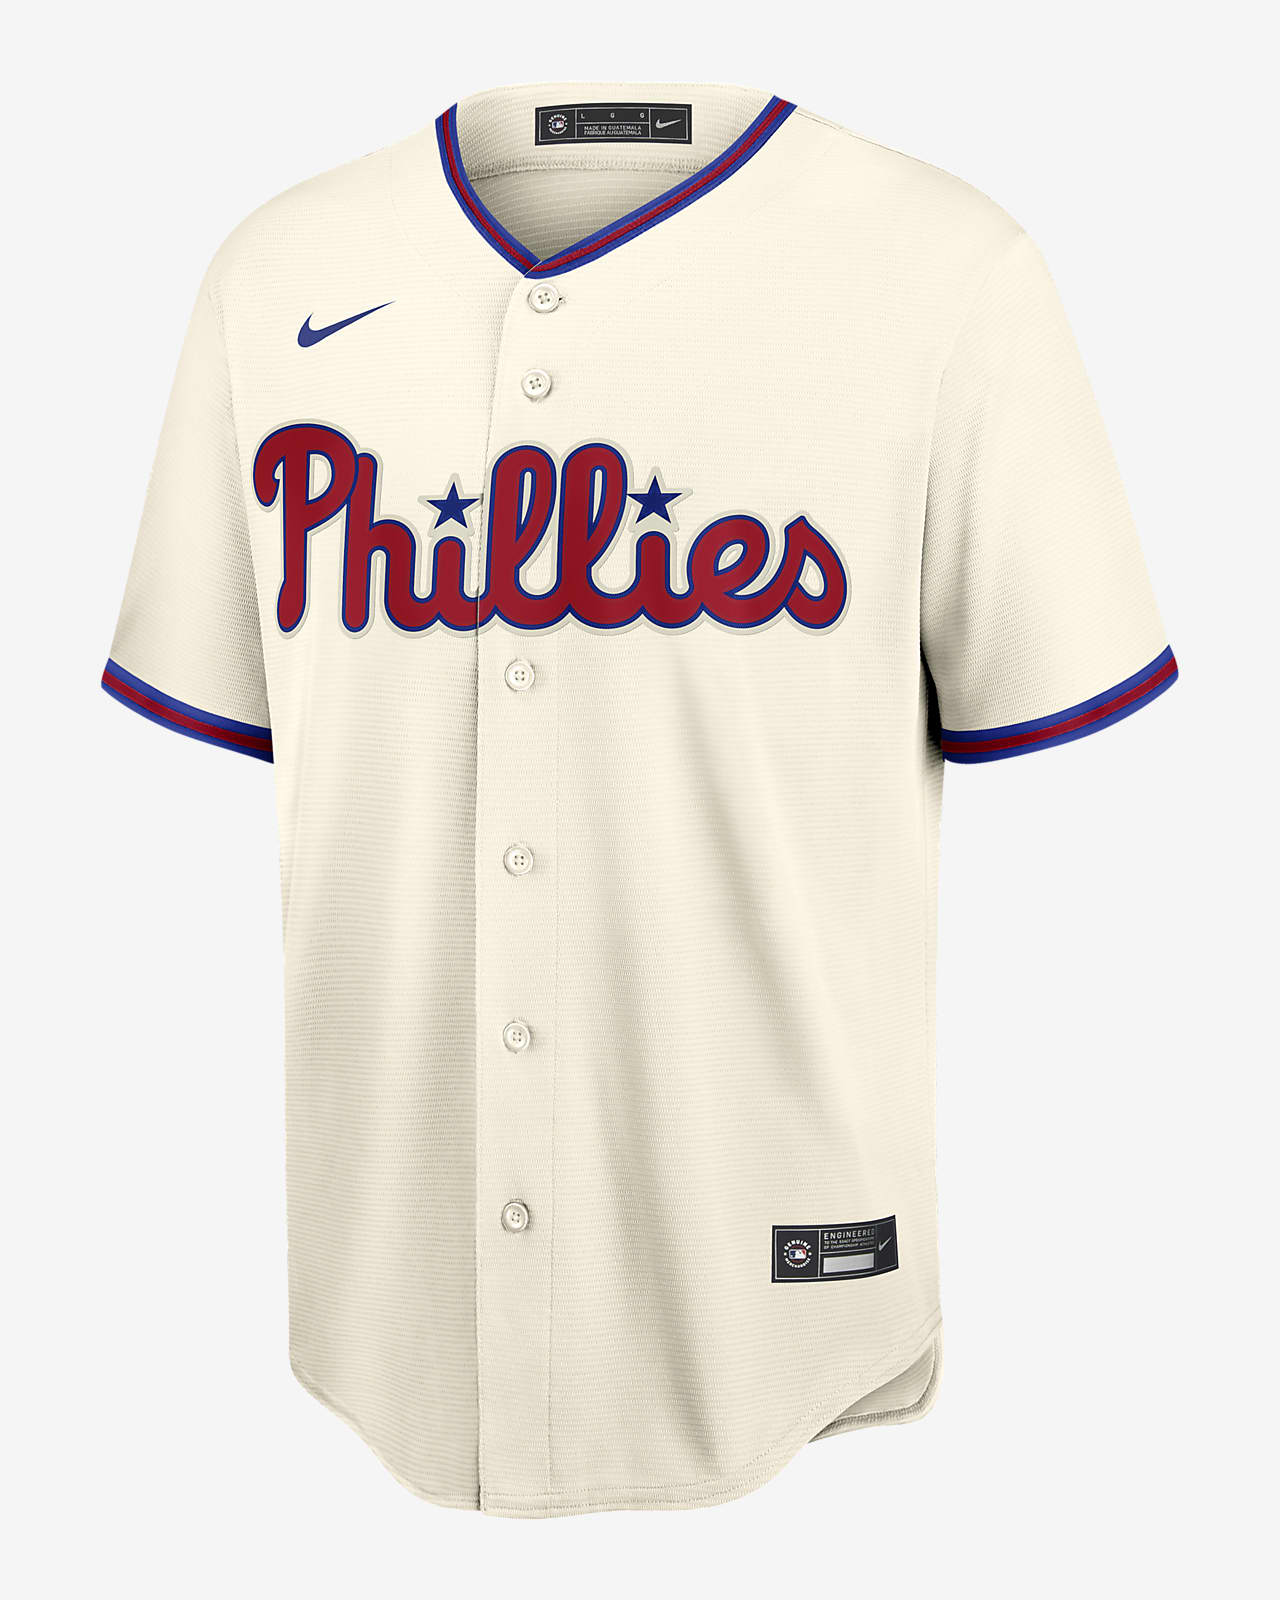 phillies jerseys over the years